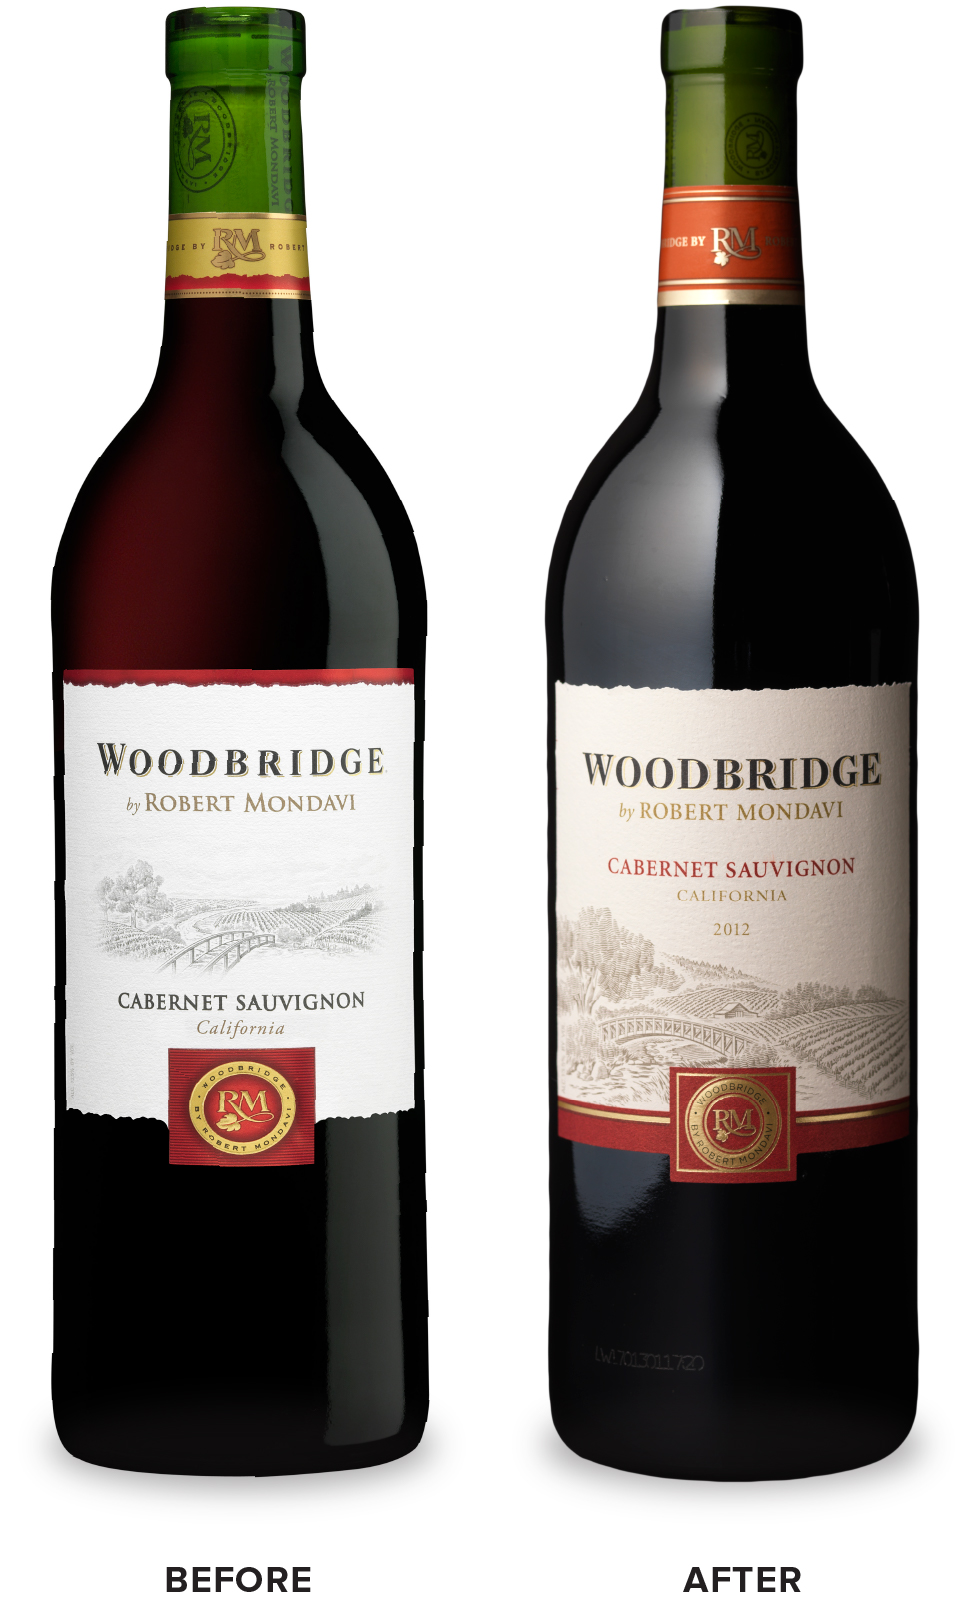 Woodbridge Wine Packaging Before Redesign on Left & After on Right